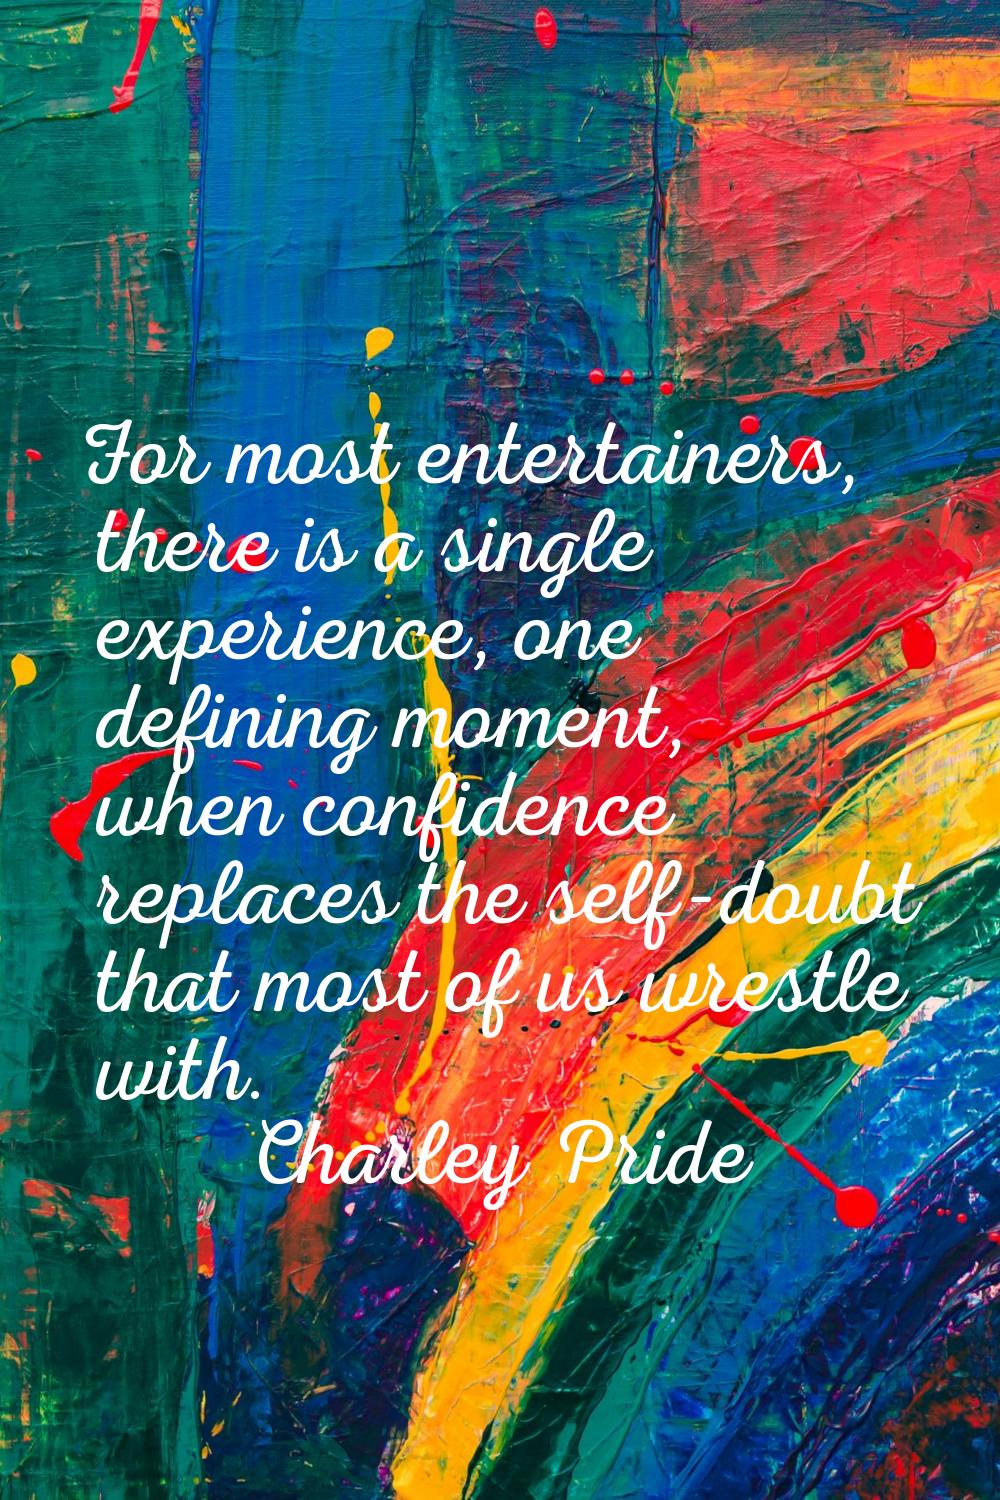 For most entertainers, there is a single experience, one defining moment, when confidence replaces 